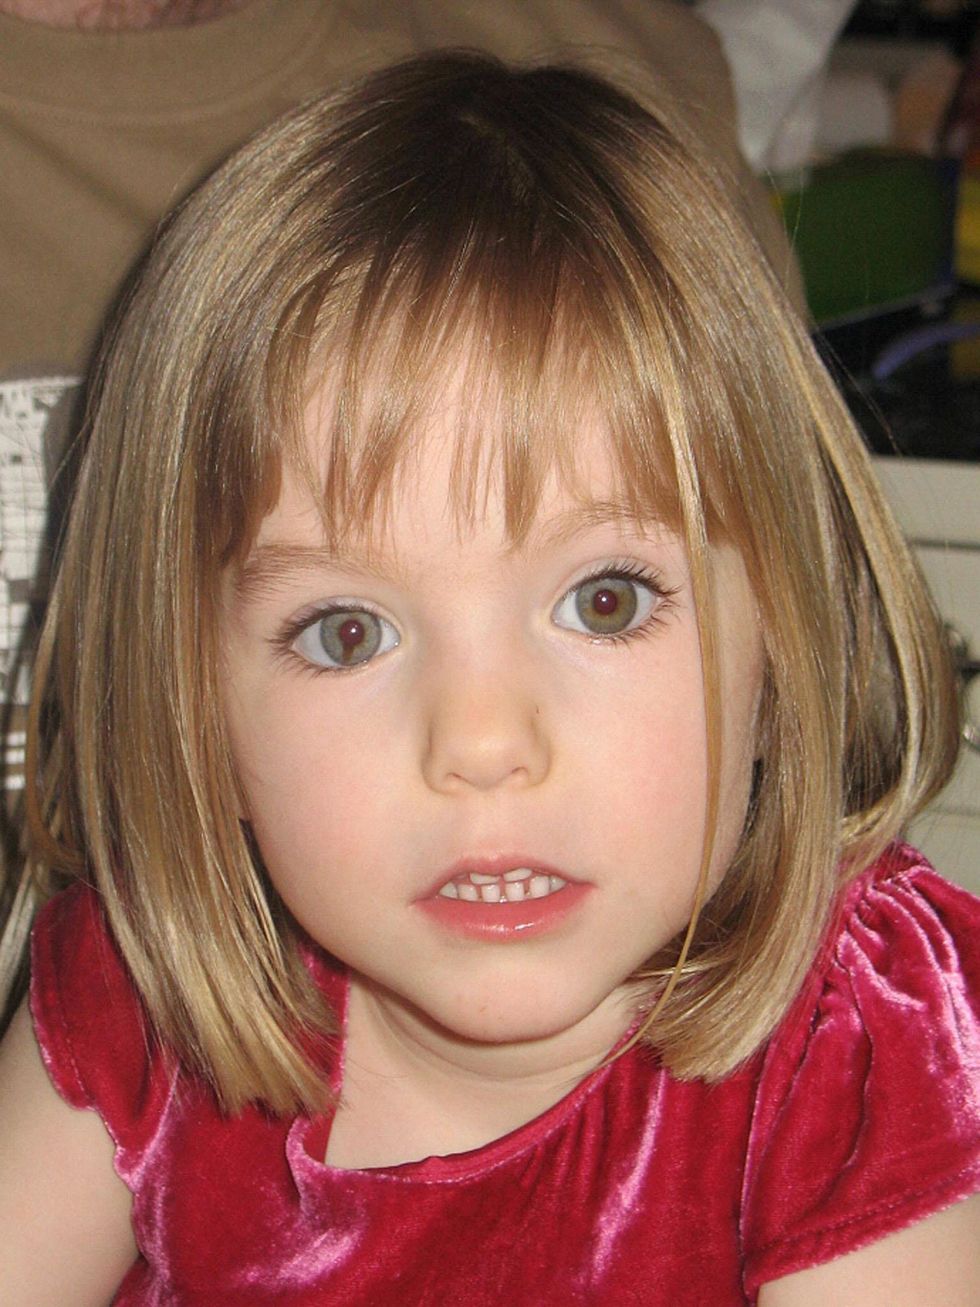 Madeleine McCann suspect charged with several sexual offences by German prosecutors